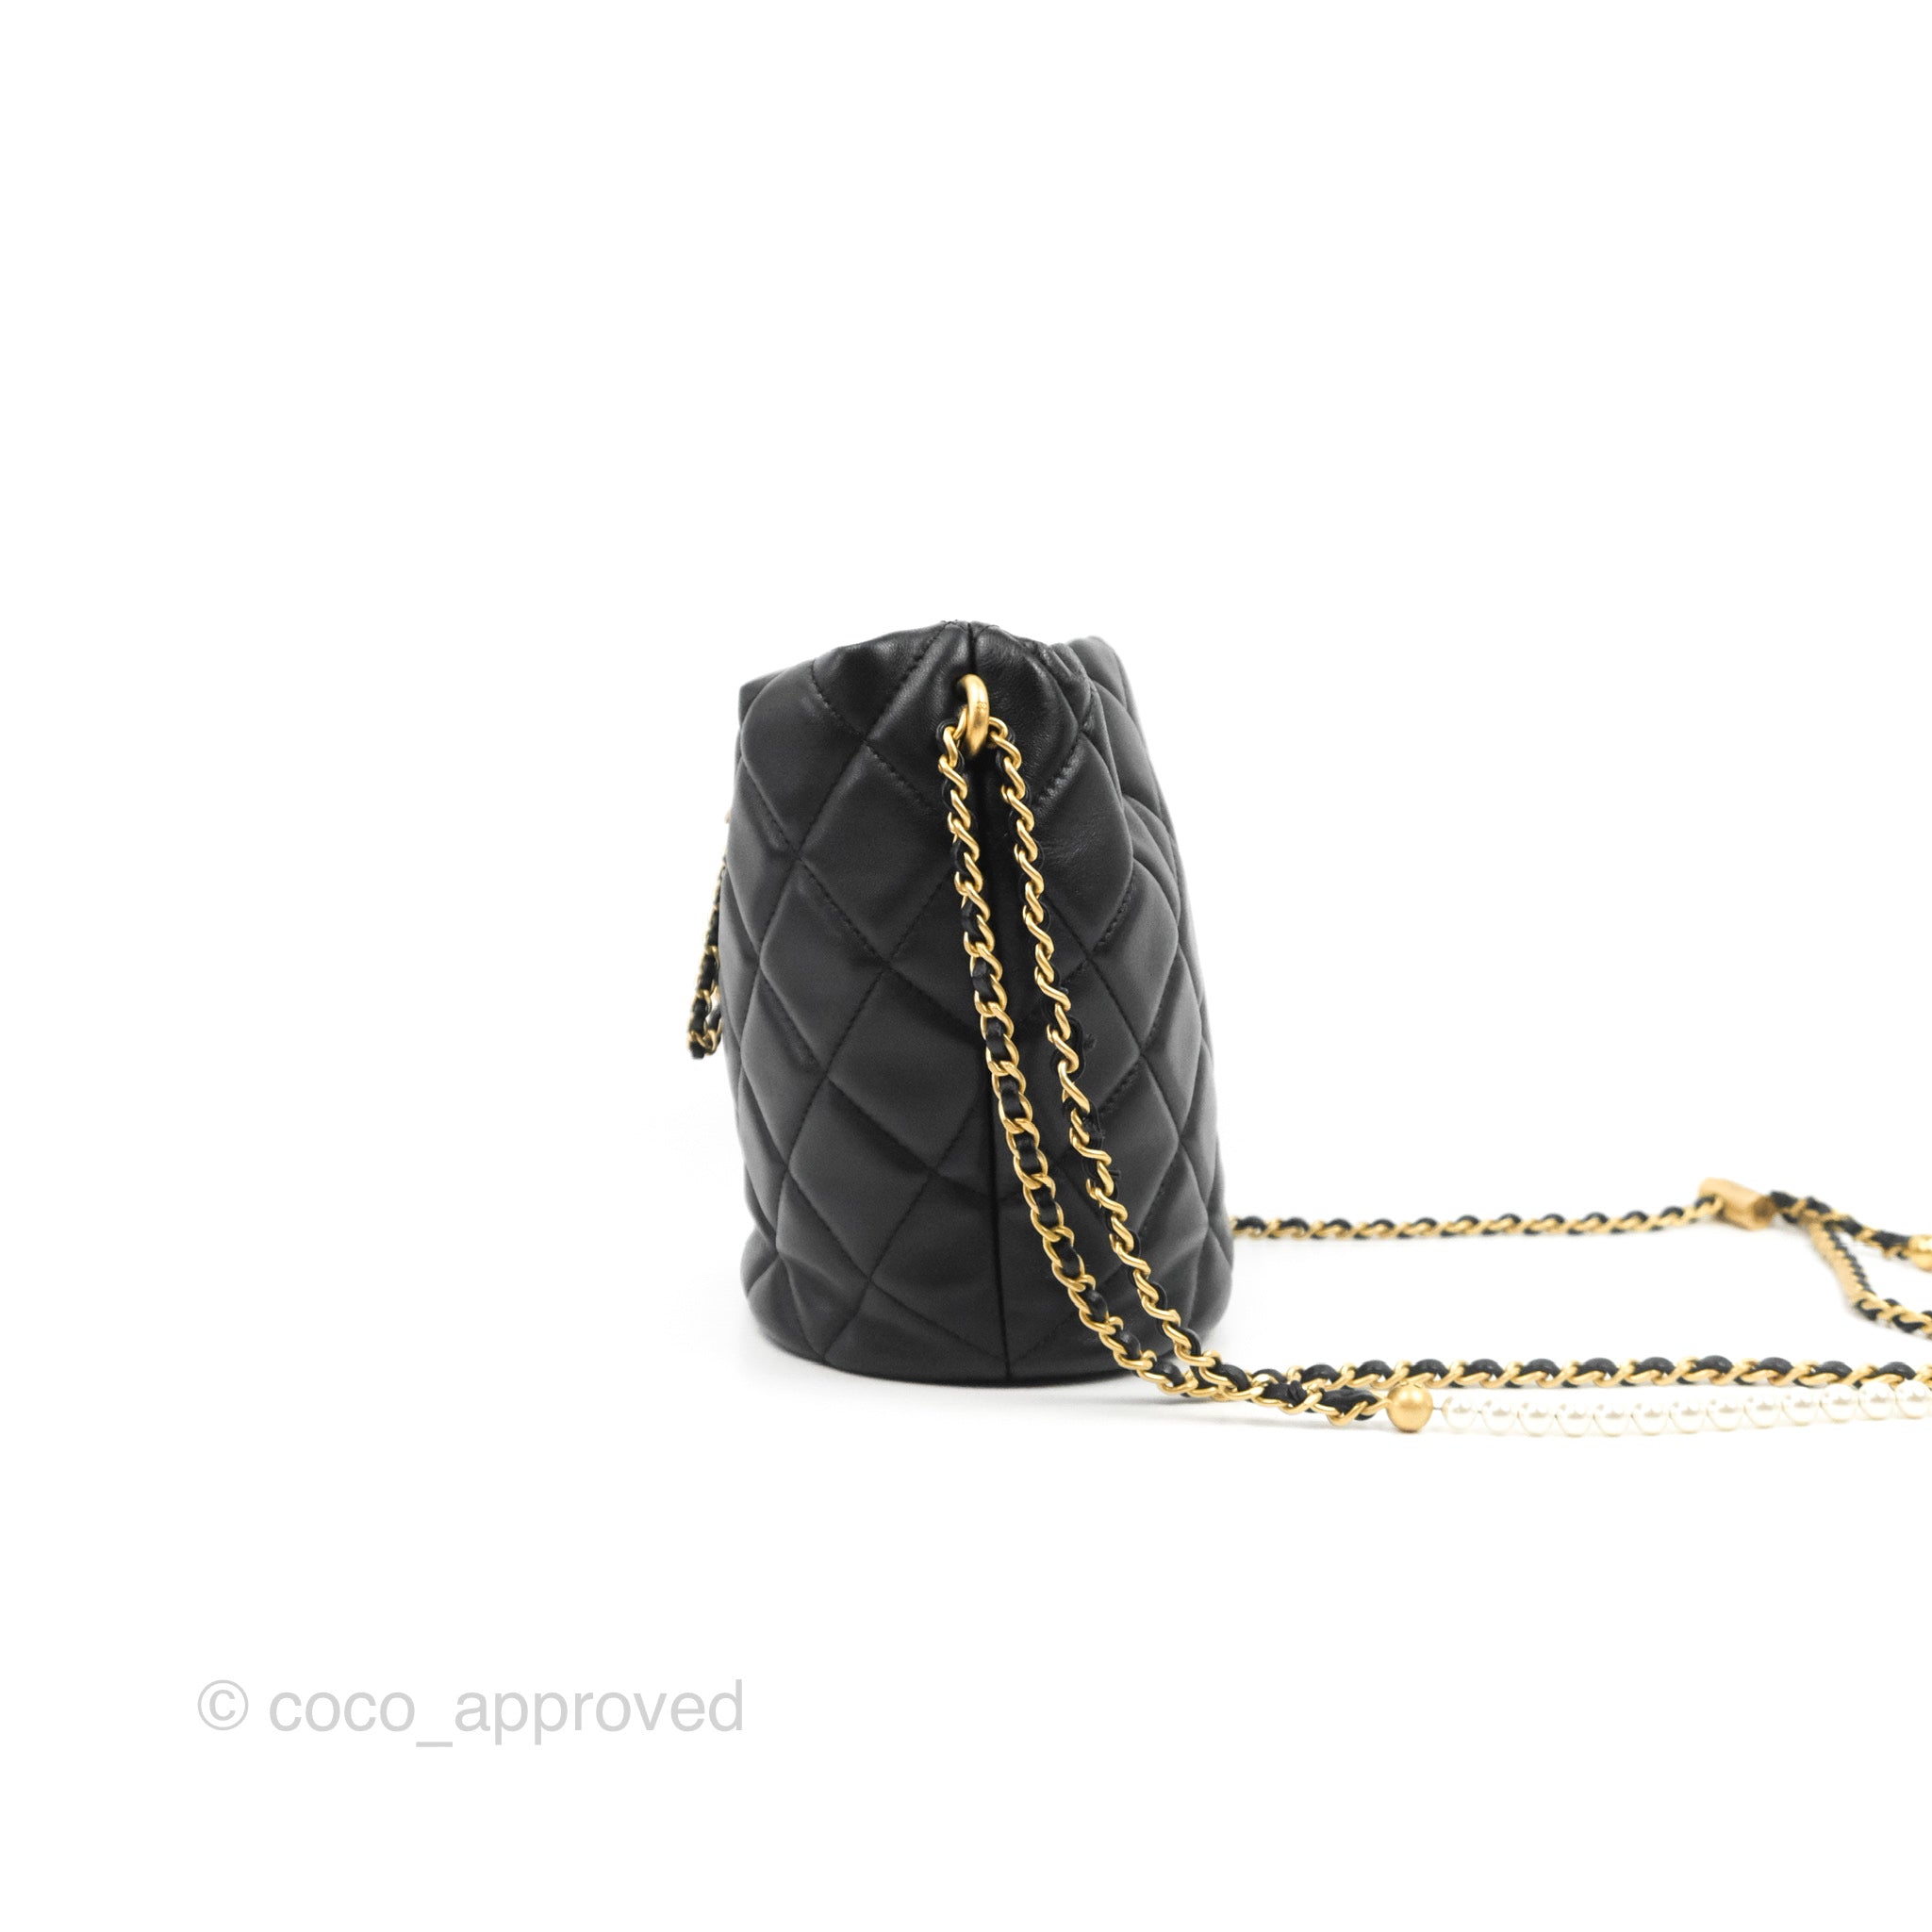 CHANEL, Bags, Chanel Cc Chain Drawstring Bucket Bag Quilted Lambskin Mini  Satchel